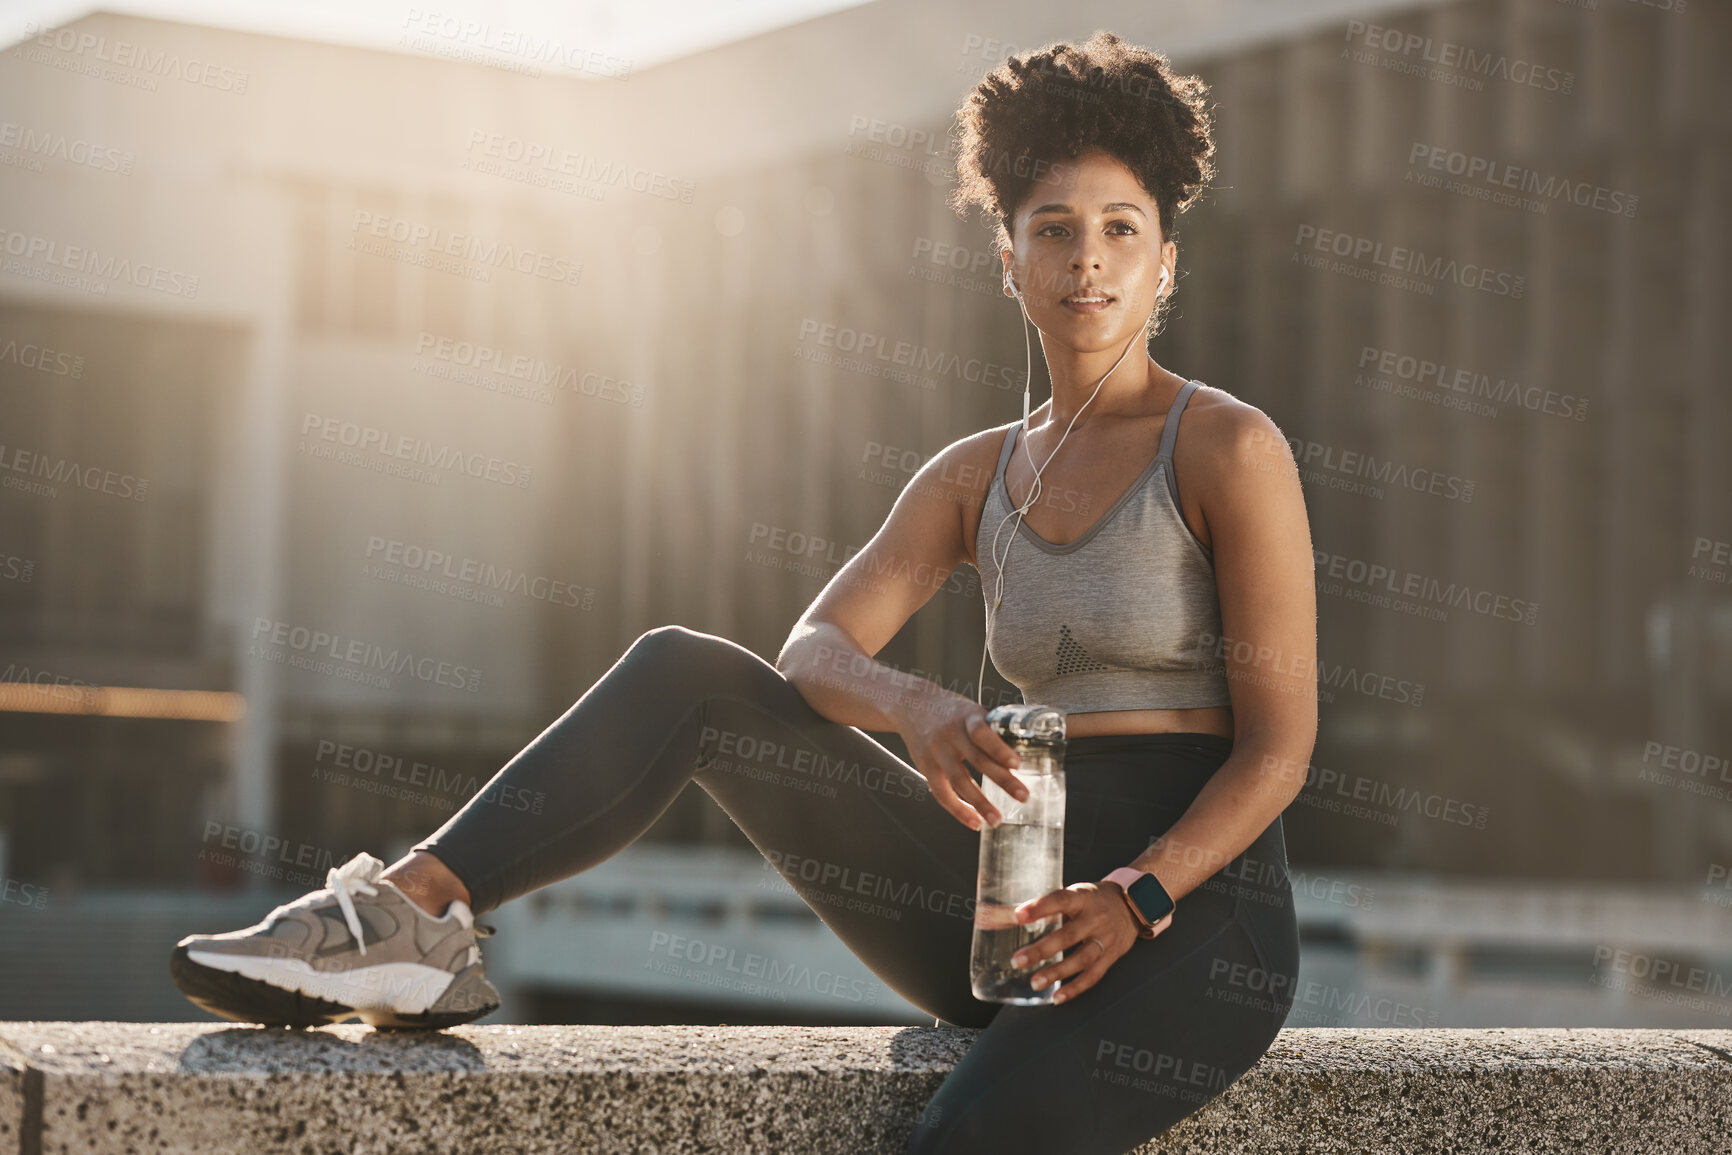 Buy stock photo Fitness, earphones and black woman, water bottle break and training workout, exercise and motivation in urban city. Thinking young athlete, sports hydration and nutrition for body, wellness and goals